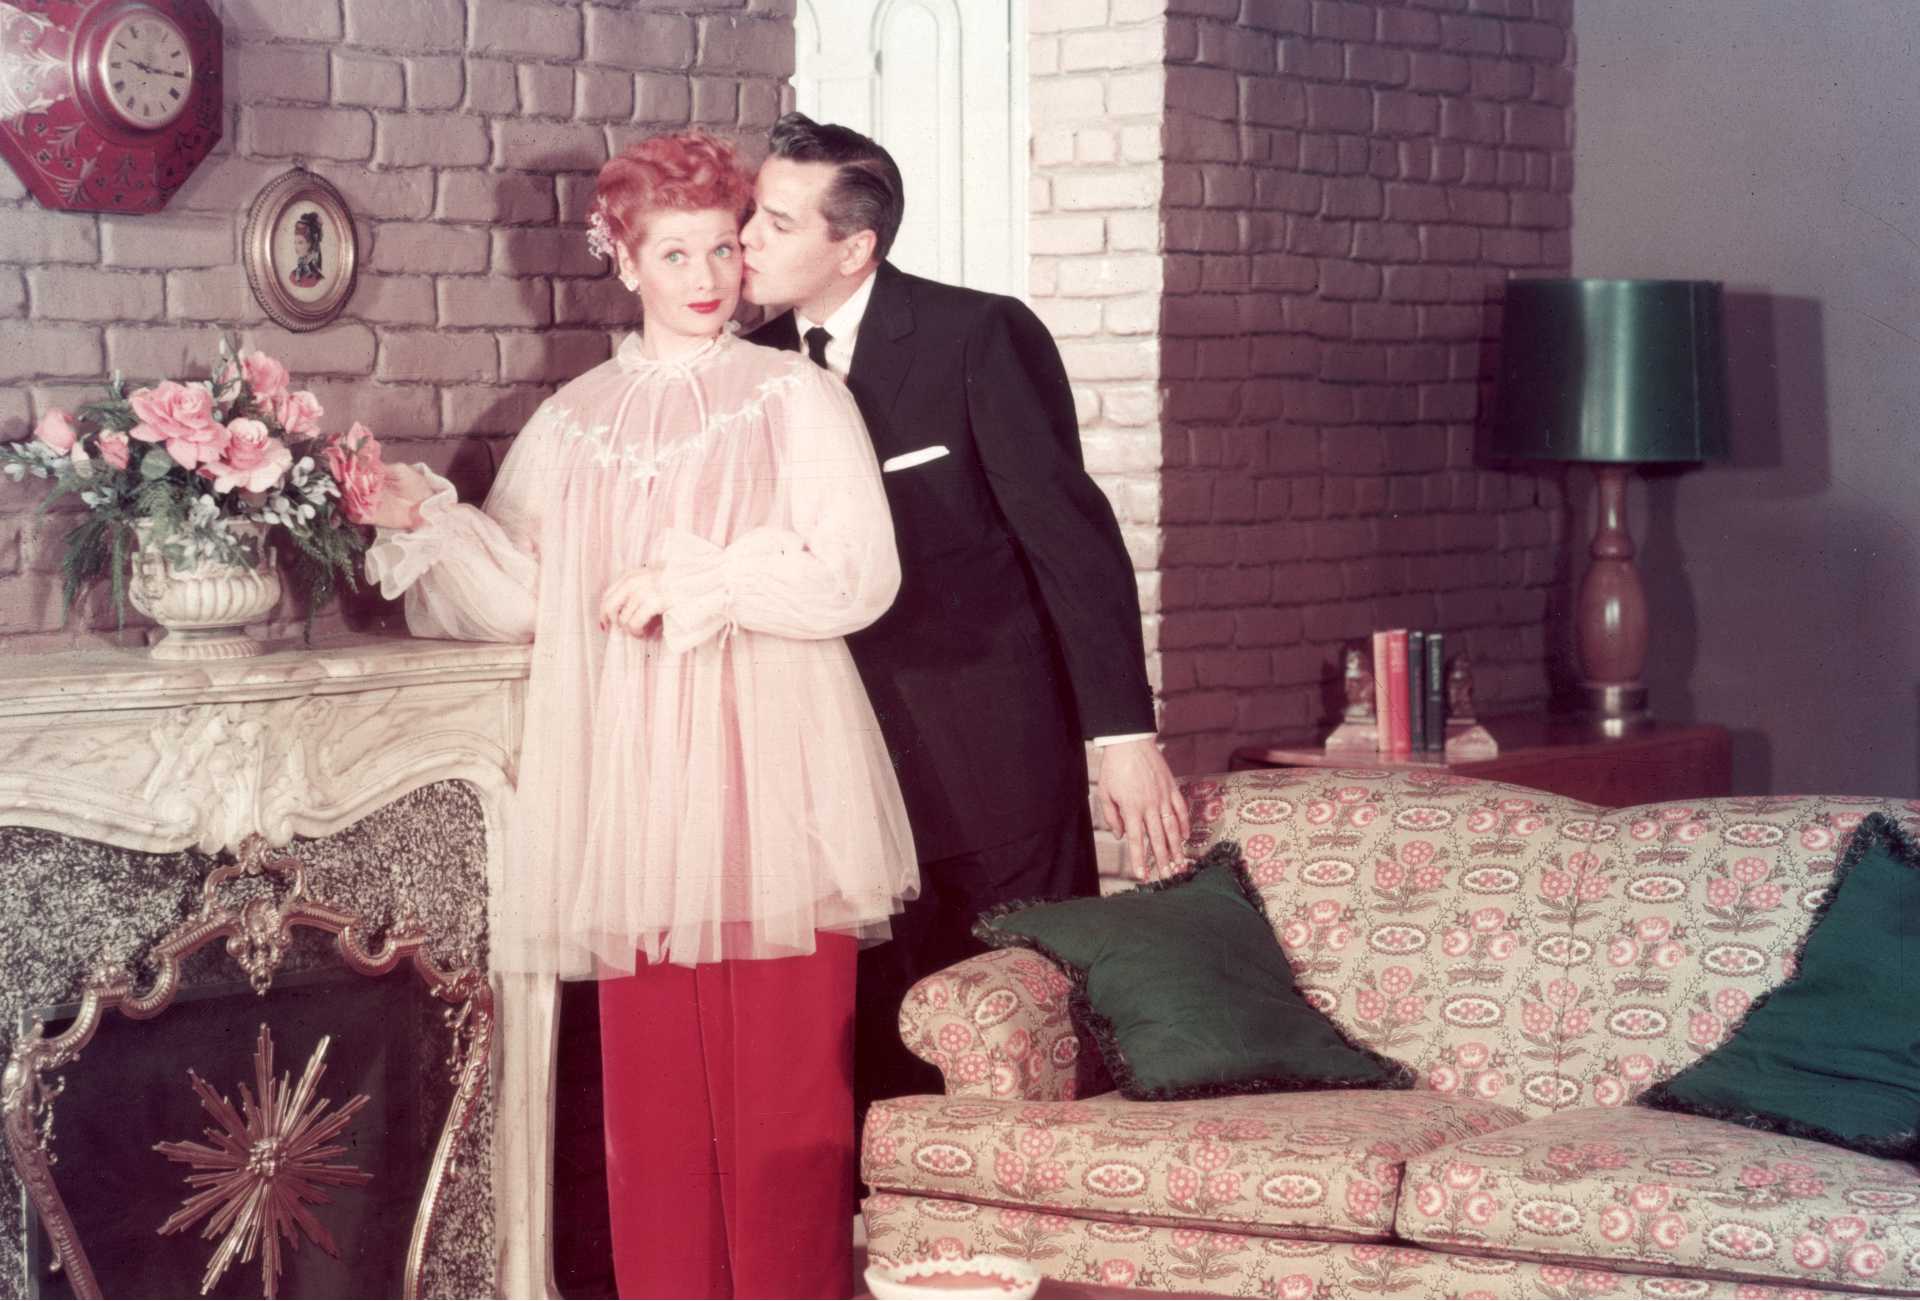 Lucille Ball and Desi Arnaz | CBS Photo Archive/Getty Images